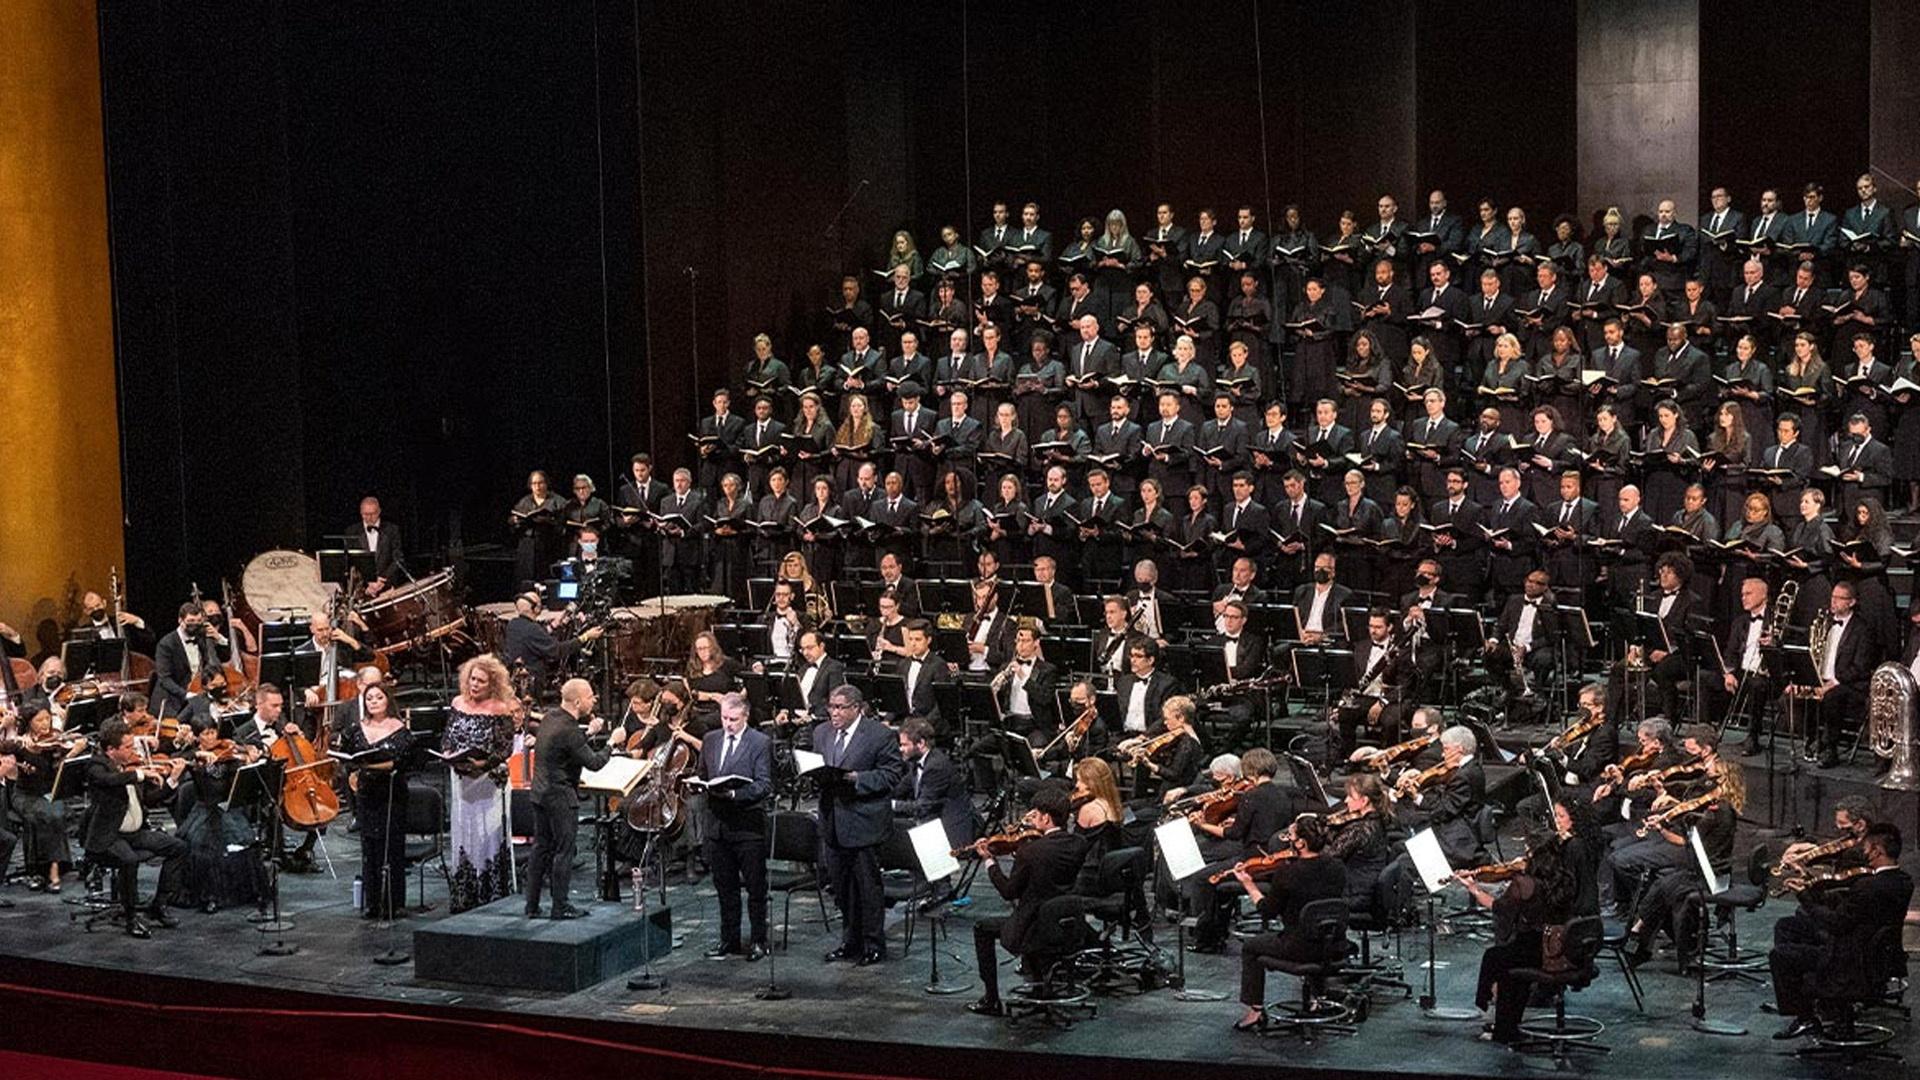 The Metropolitan Opera Orchestra and Chorus onstage for Requiem